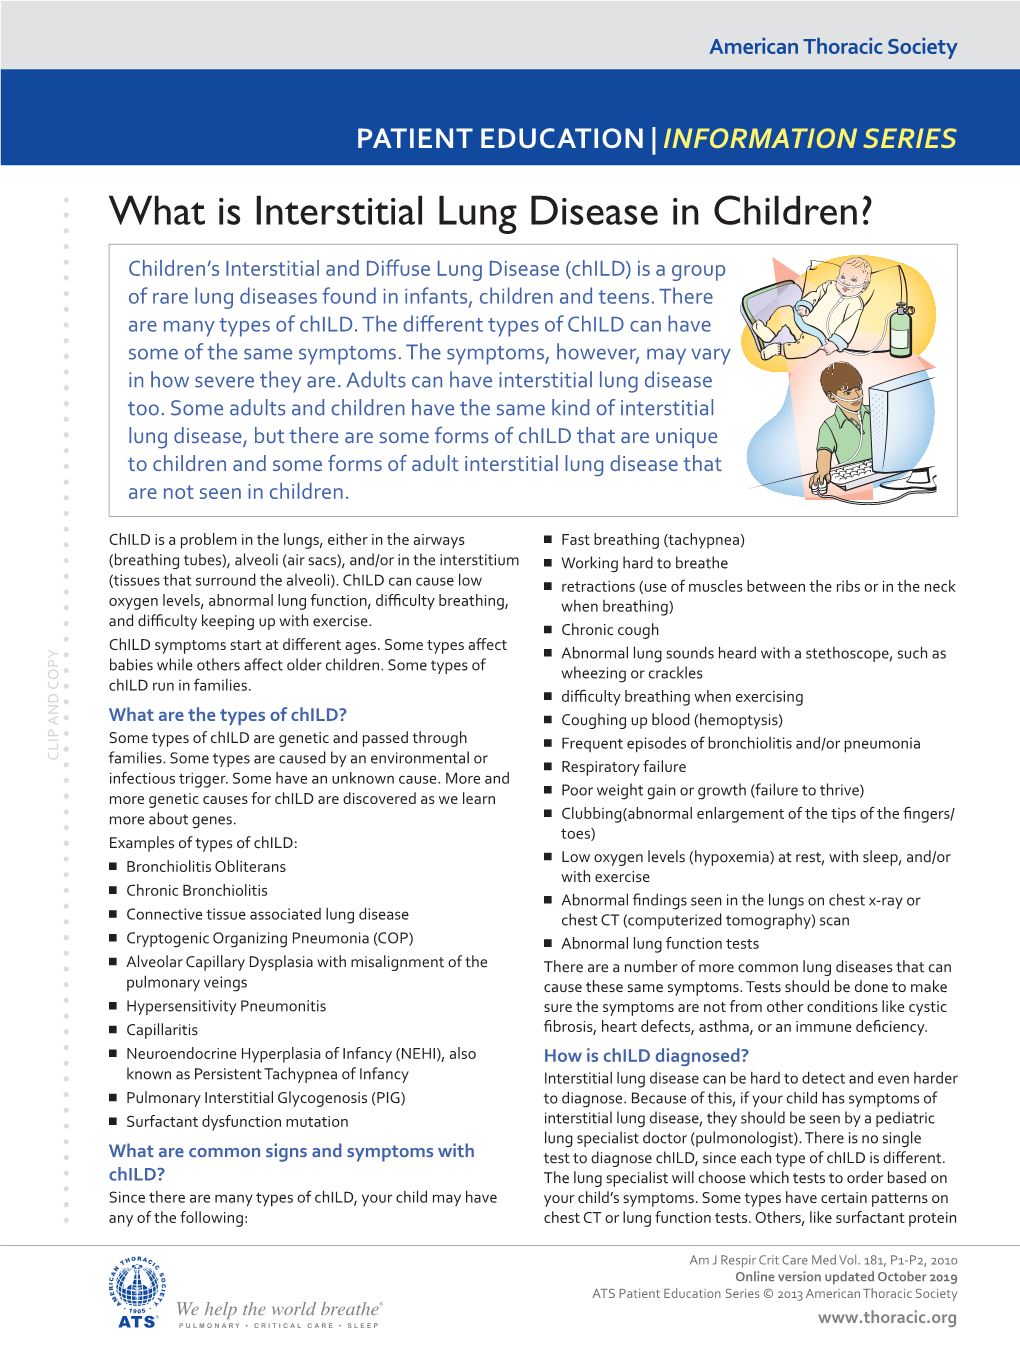 What Is Interstitial Lung Disease in Children?